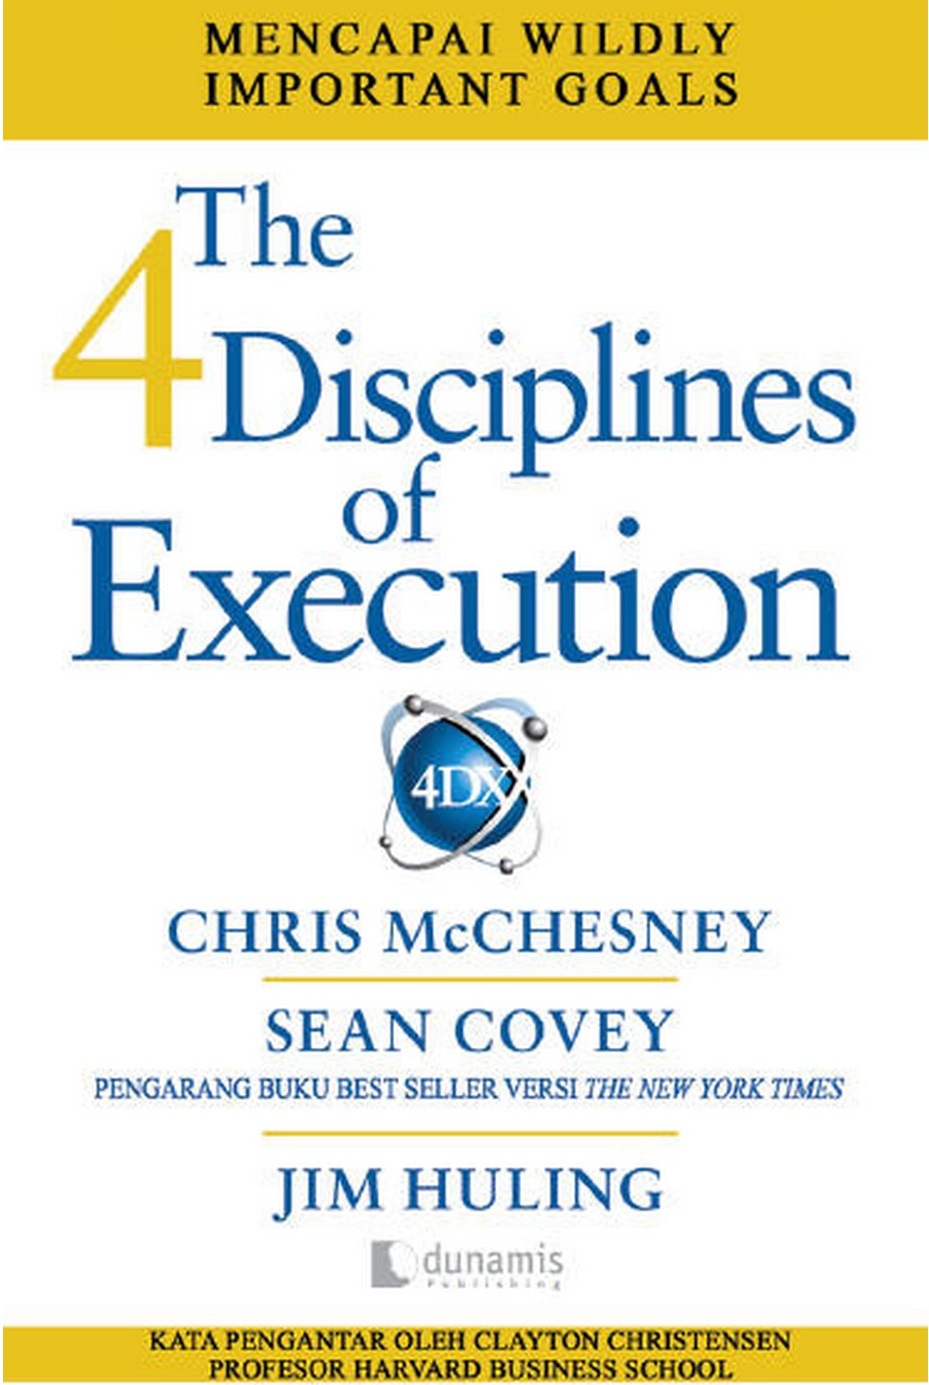 The 4 disciplines of execution